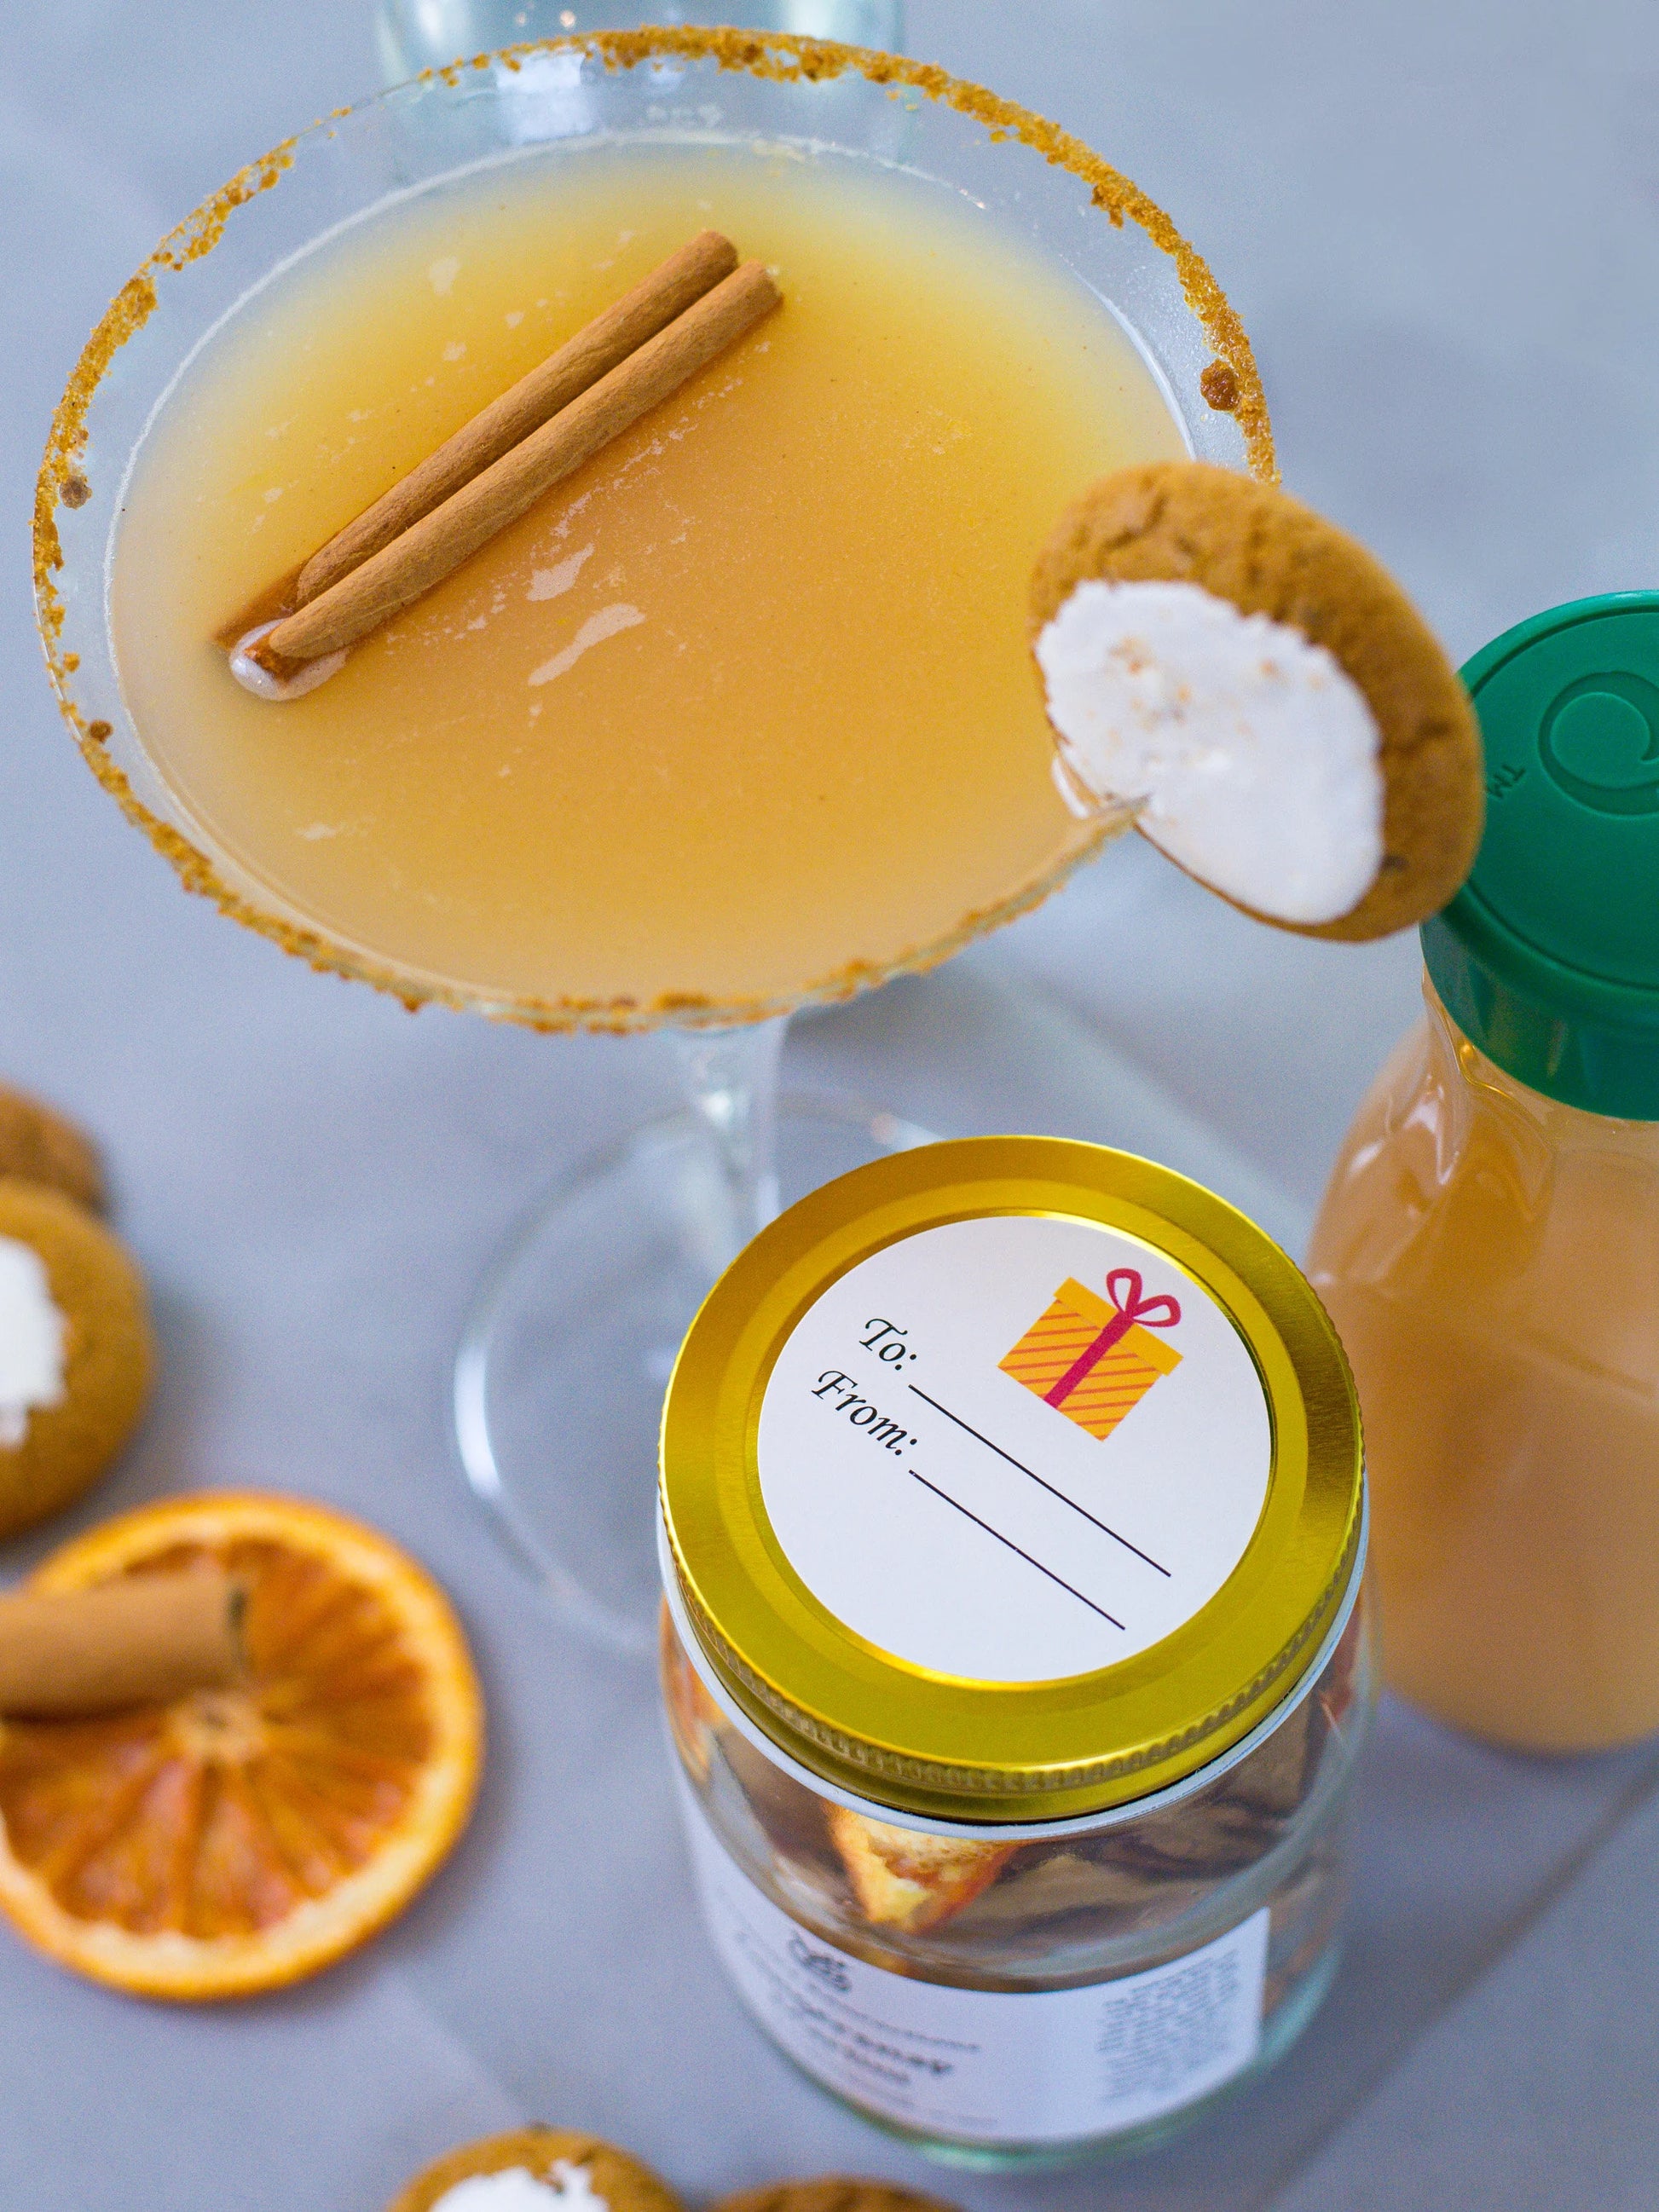 This Mason Jar Cocktail Is the Best Stocking Stuffer Idea for Adults - Brit  + Co